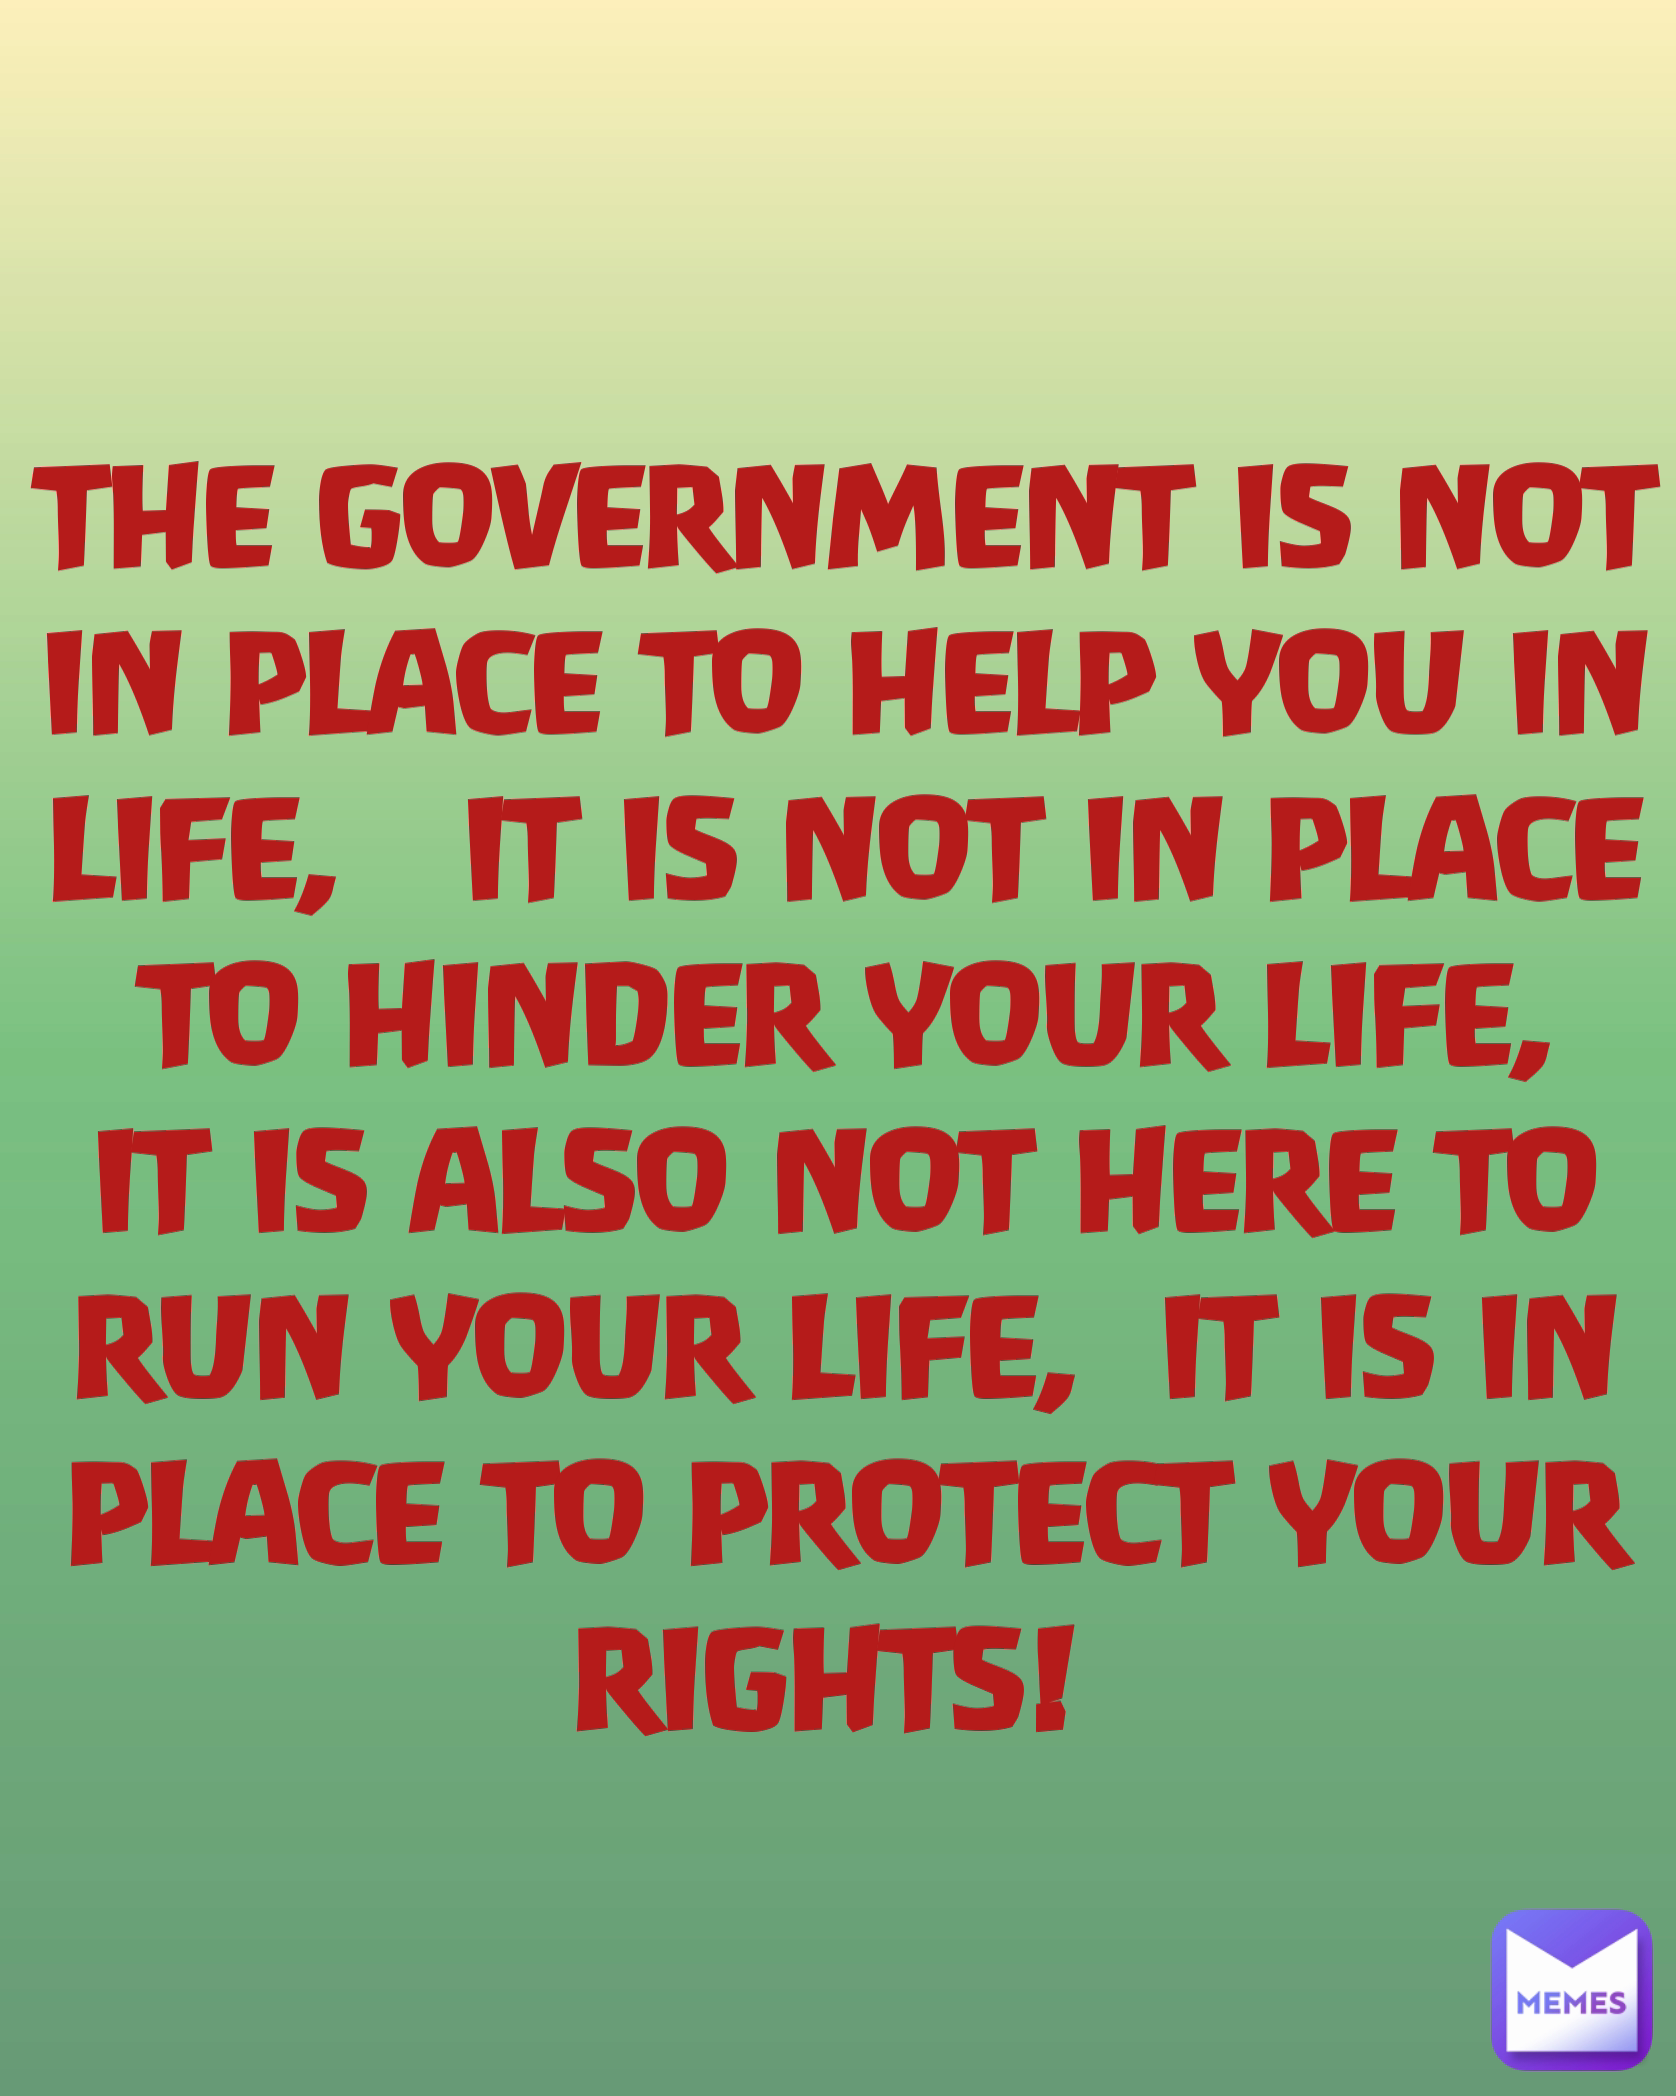 THE GOVERNMENT IS NOT IN PLACE TO HELP YOU IN LIFE,   IT IS NOT IN PLACE TO HINDER YOUR LIFE, IT IS ALSO NOT HERE TO RUN YOUR LIFE,  IT IS IN PLACE TO PROTECT YOUR RIGHTS! 